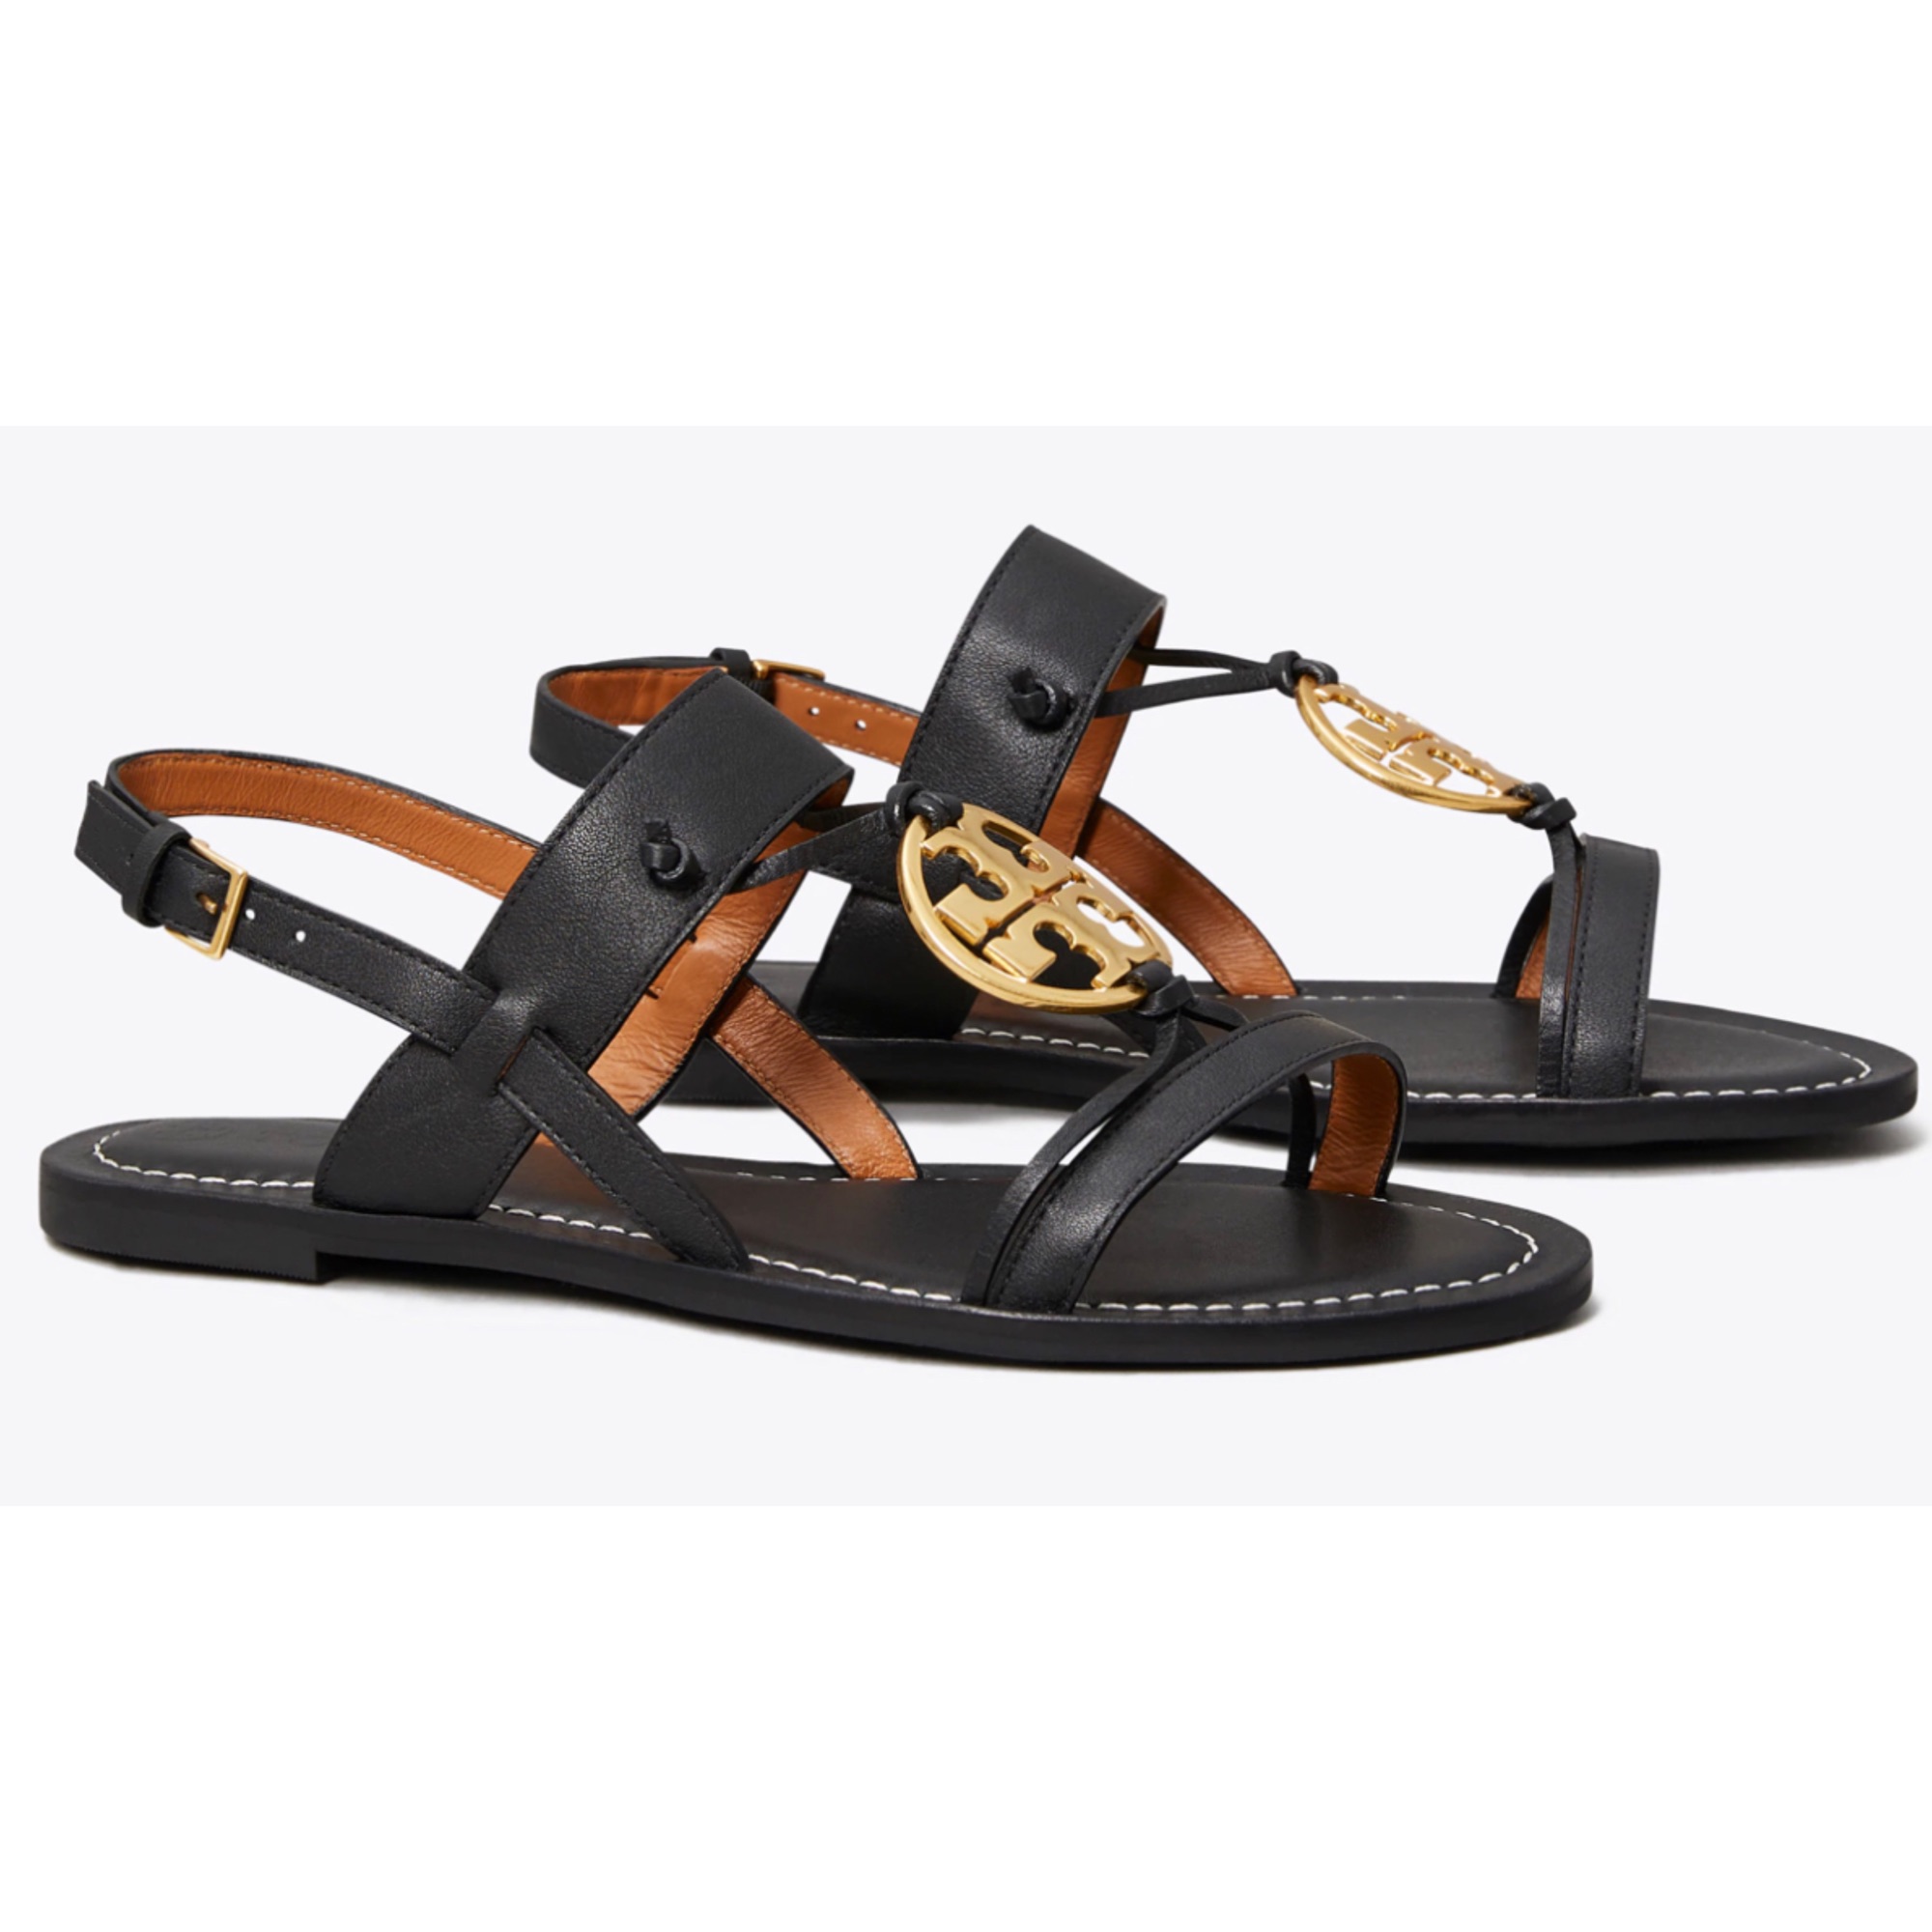 Total 101+ imagen tory burch sandals philippines - Abzlocal.mx